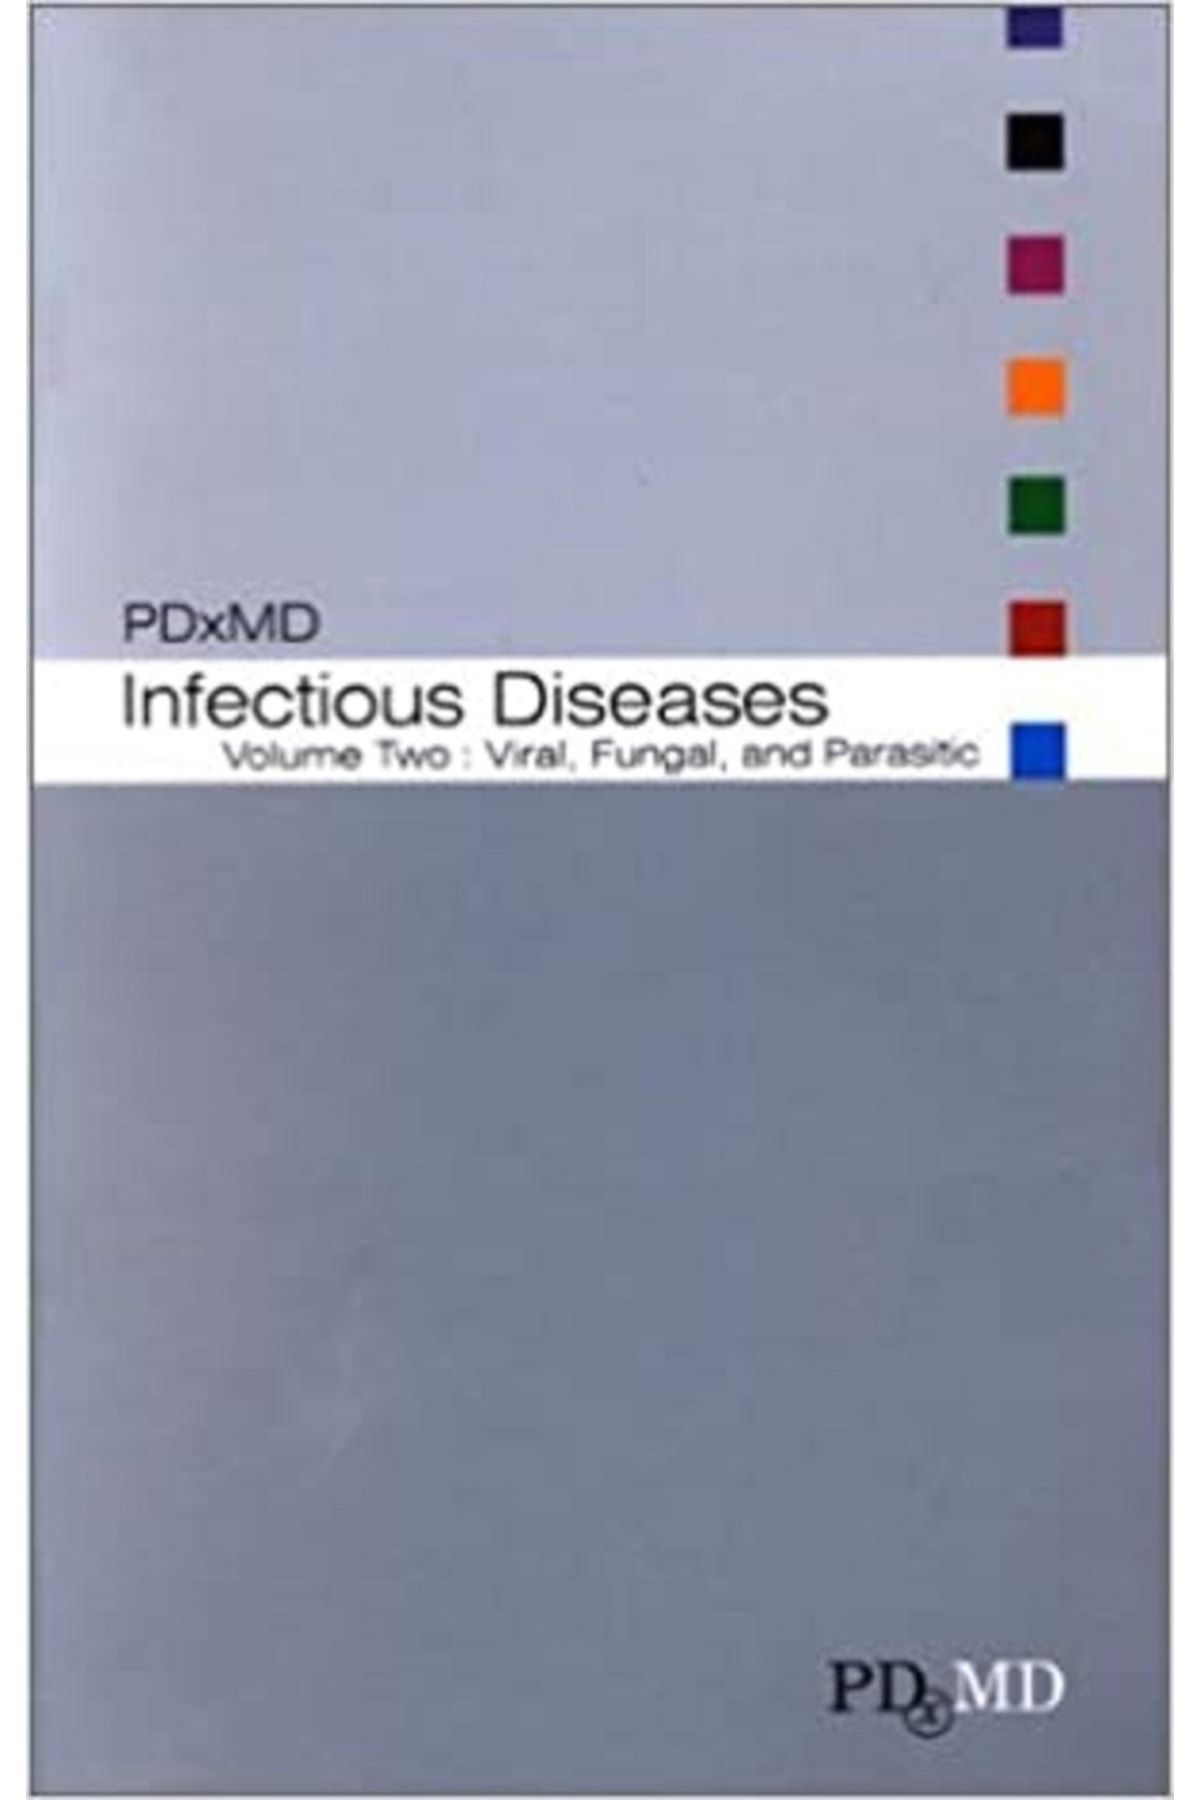 PDX Md Infectious Diseases-vol 2: Viral, Fungal, Parasitic